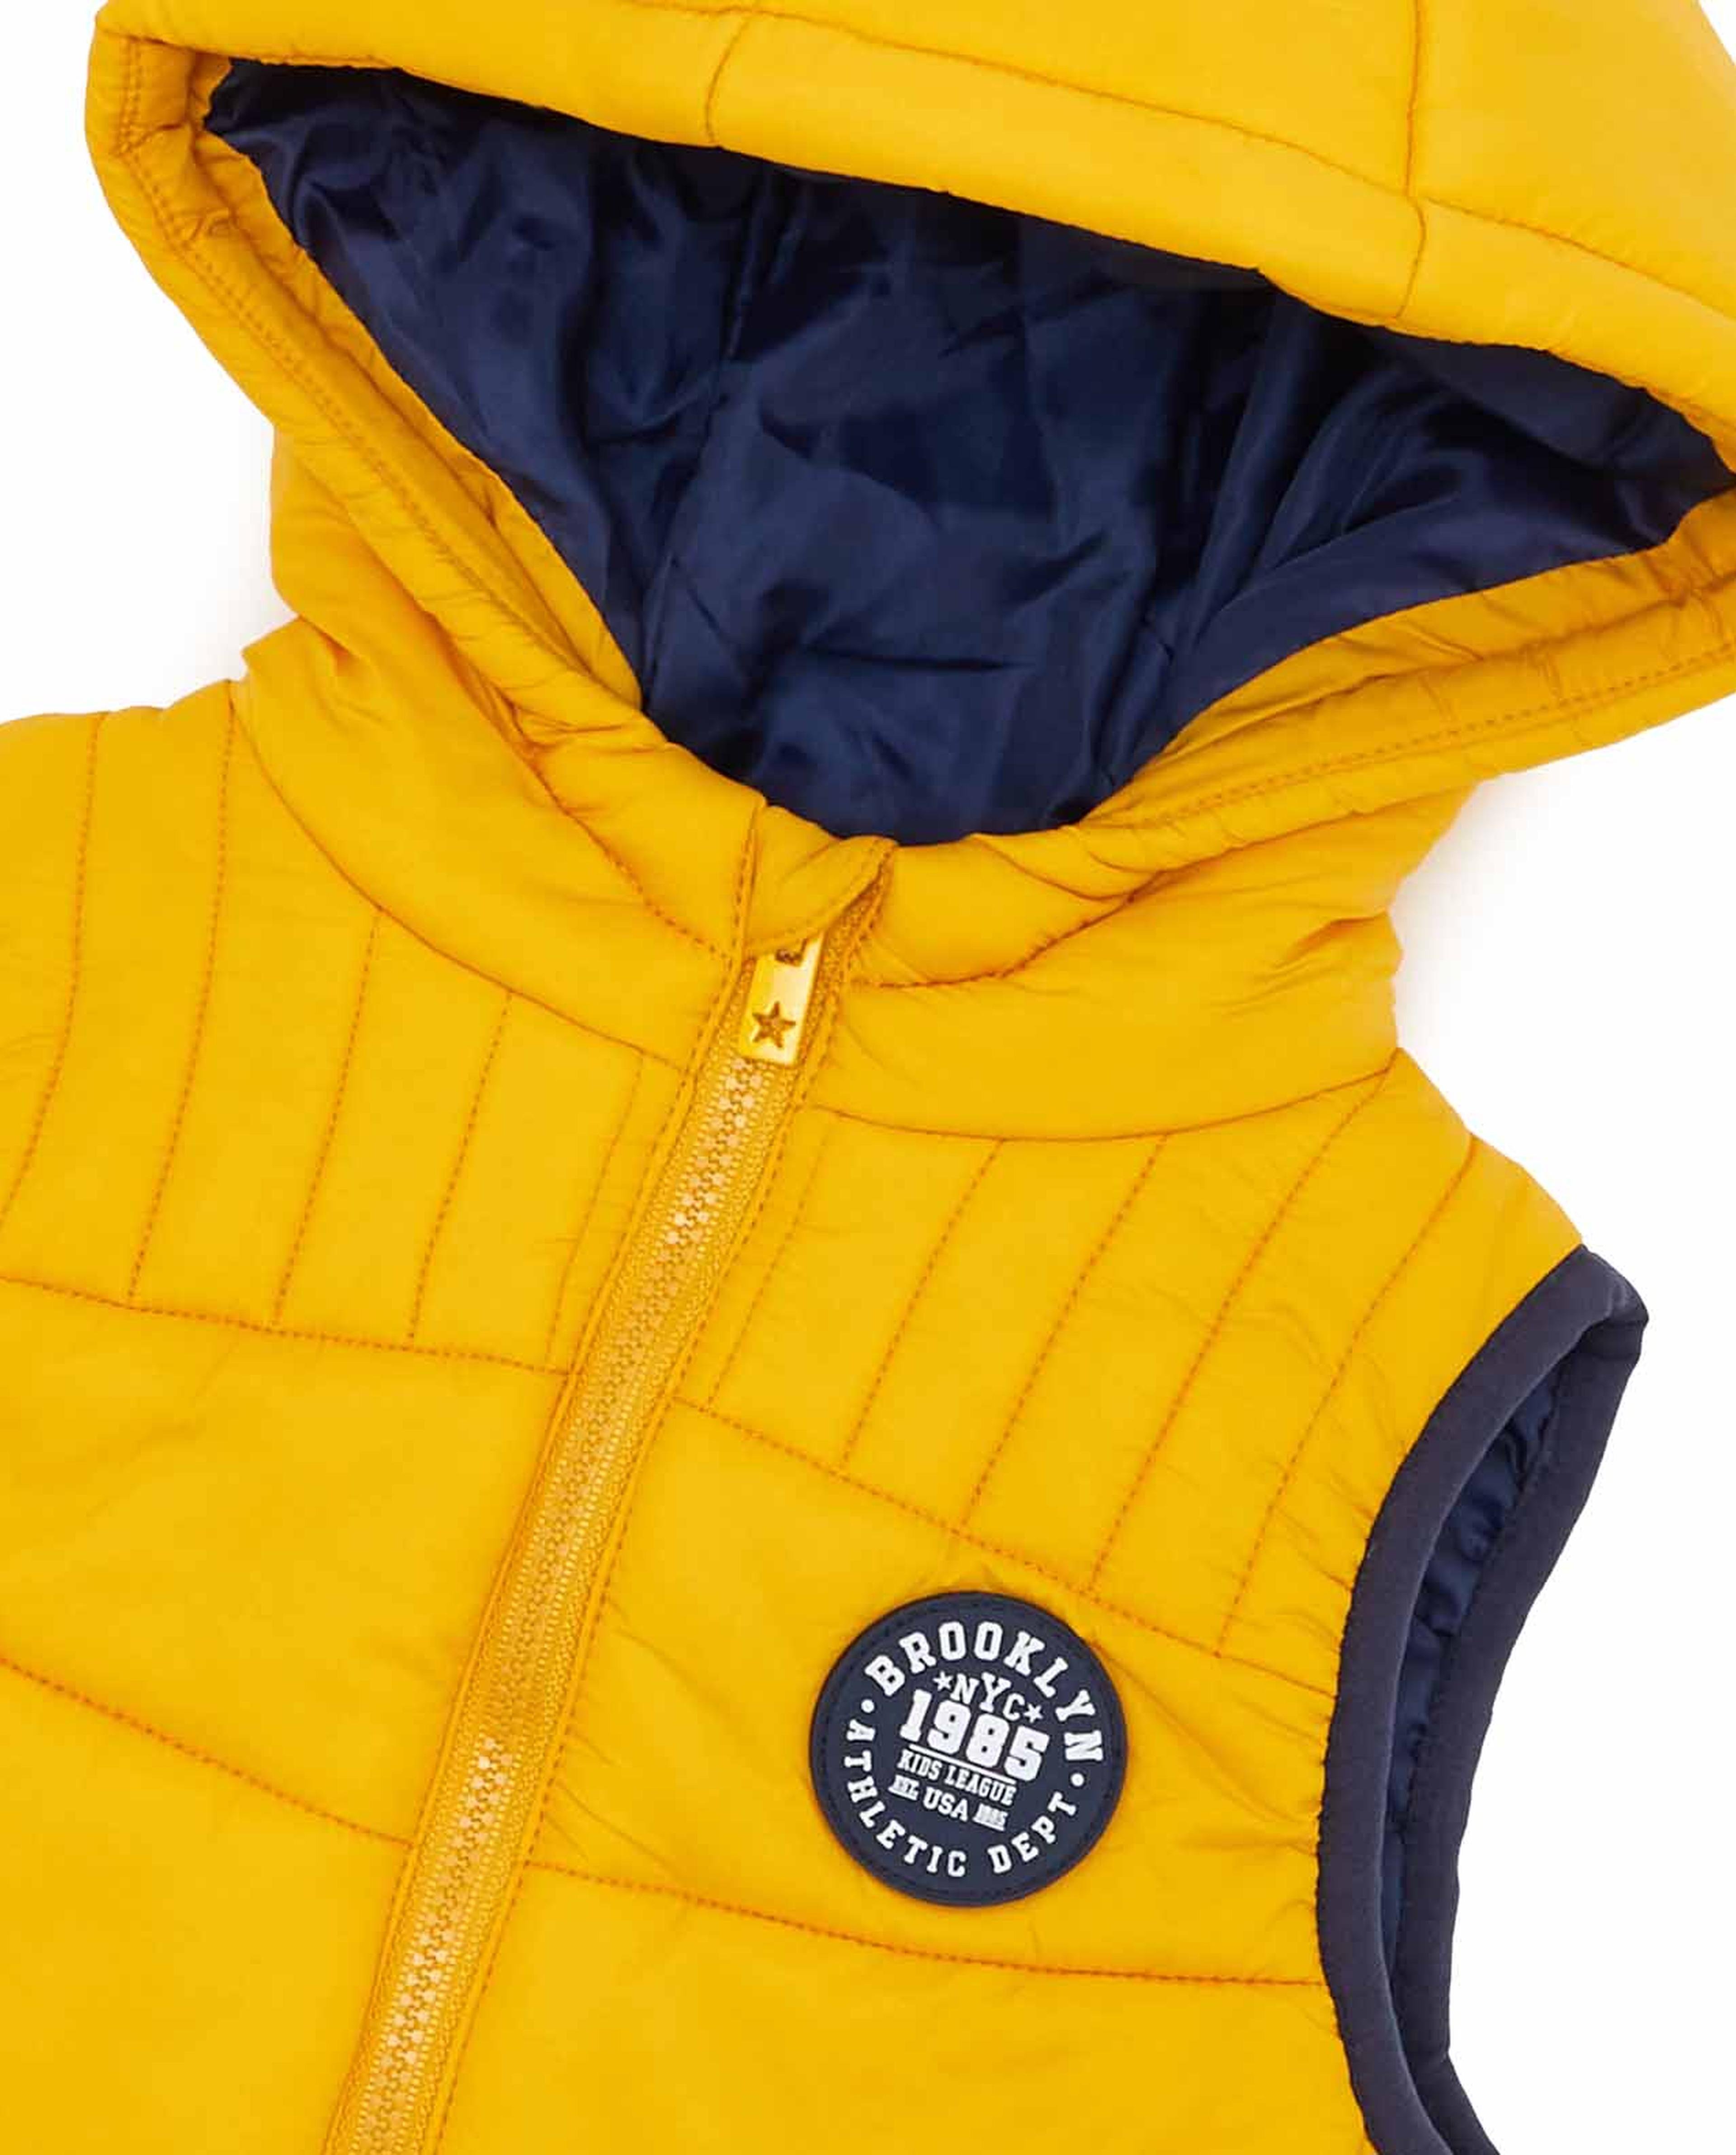 Badge Detail Hooded Gilet with Zipper Closure